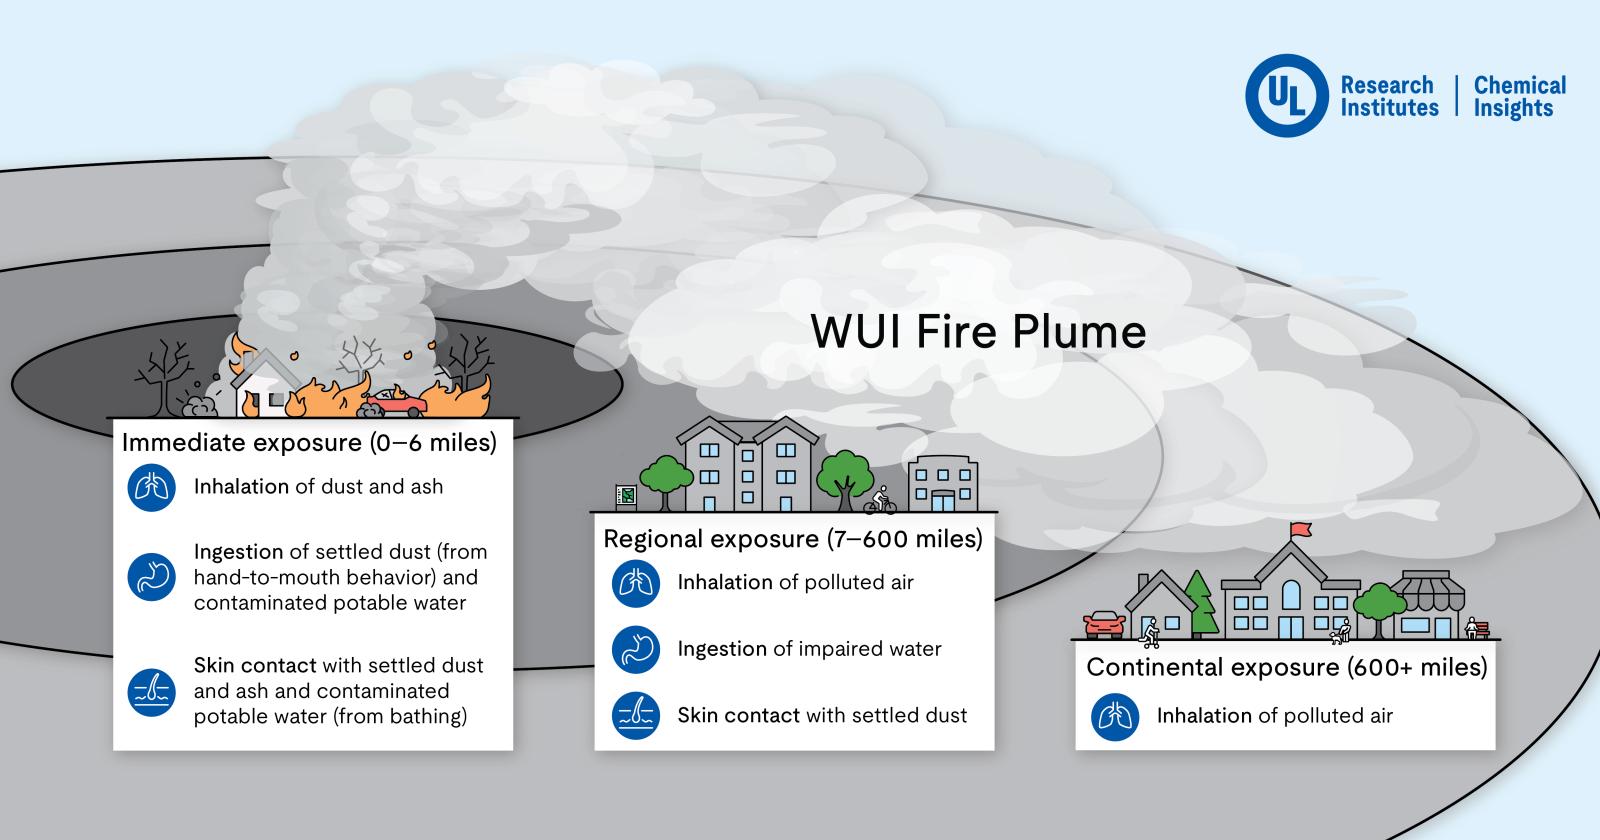 Illustration of a WUI fire plume